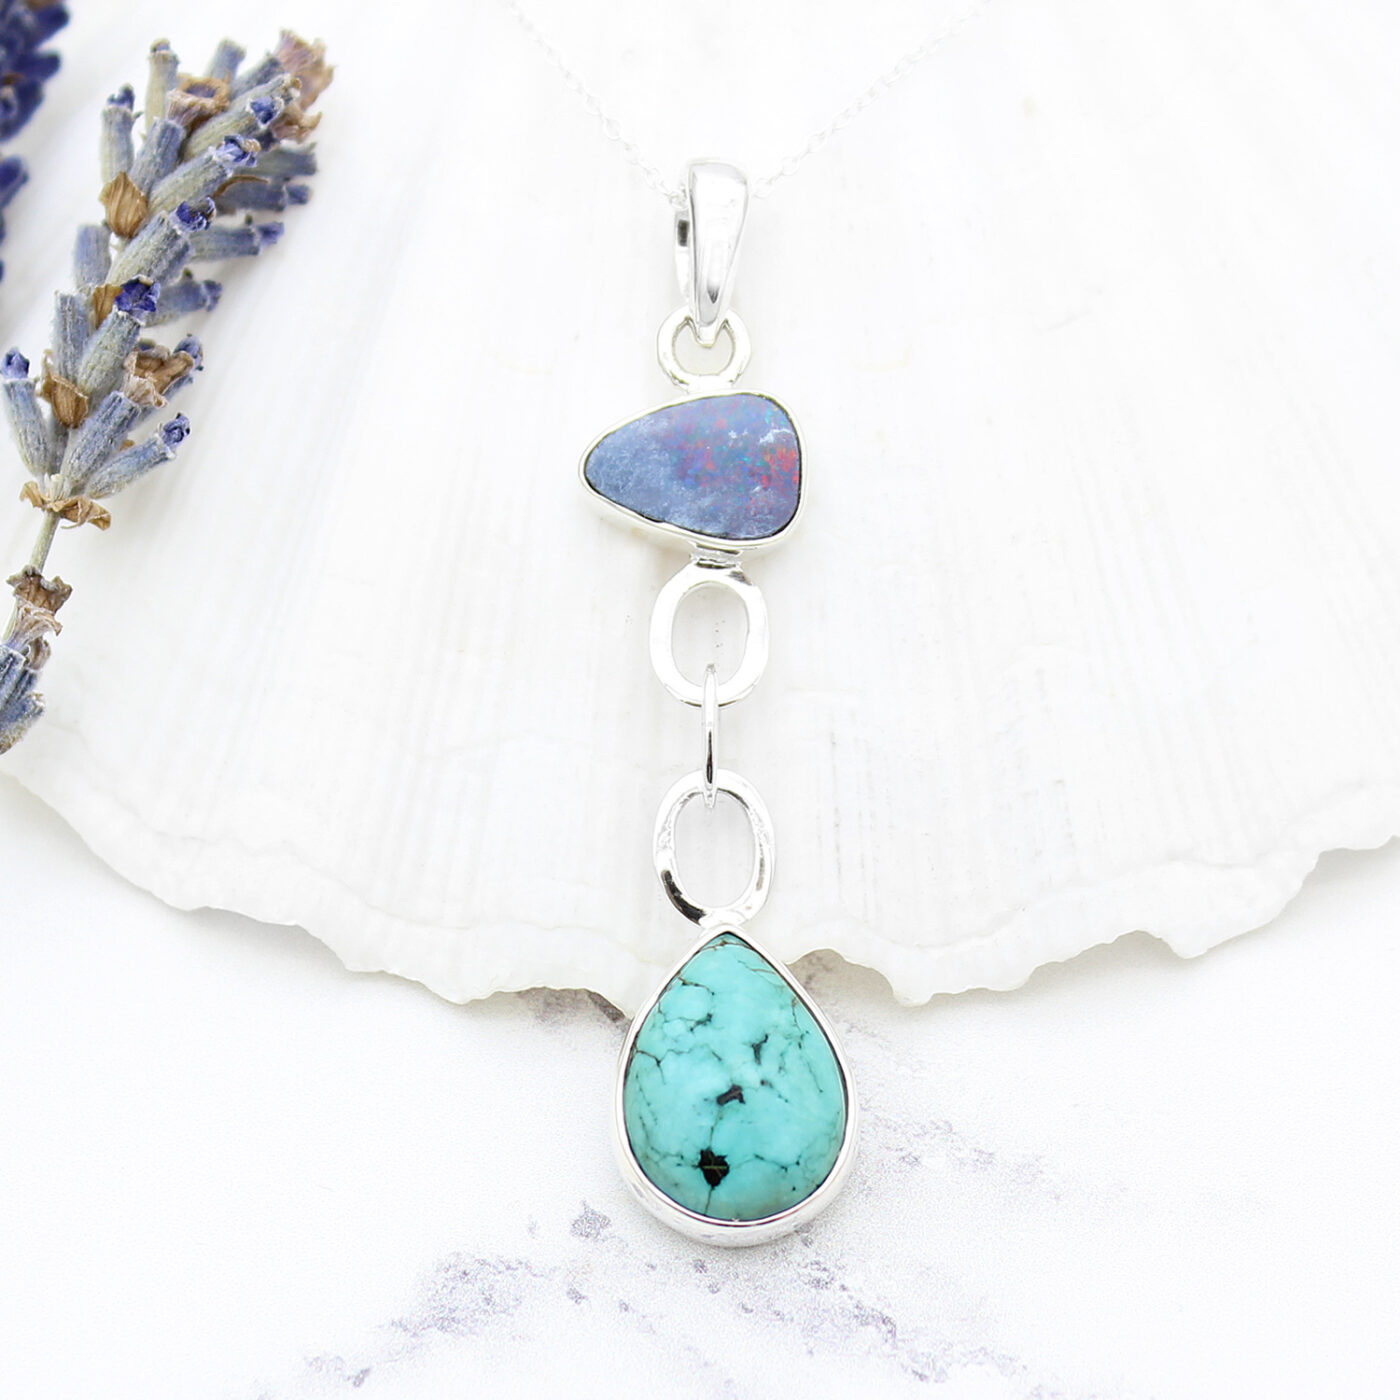 Blue Opal And Tibetan Turquoise Gemstone Silver Pendant